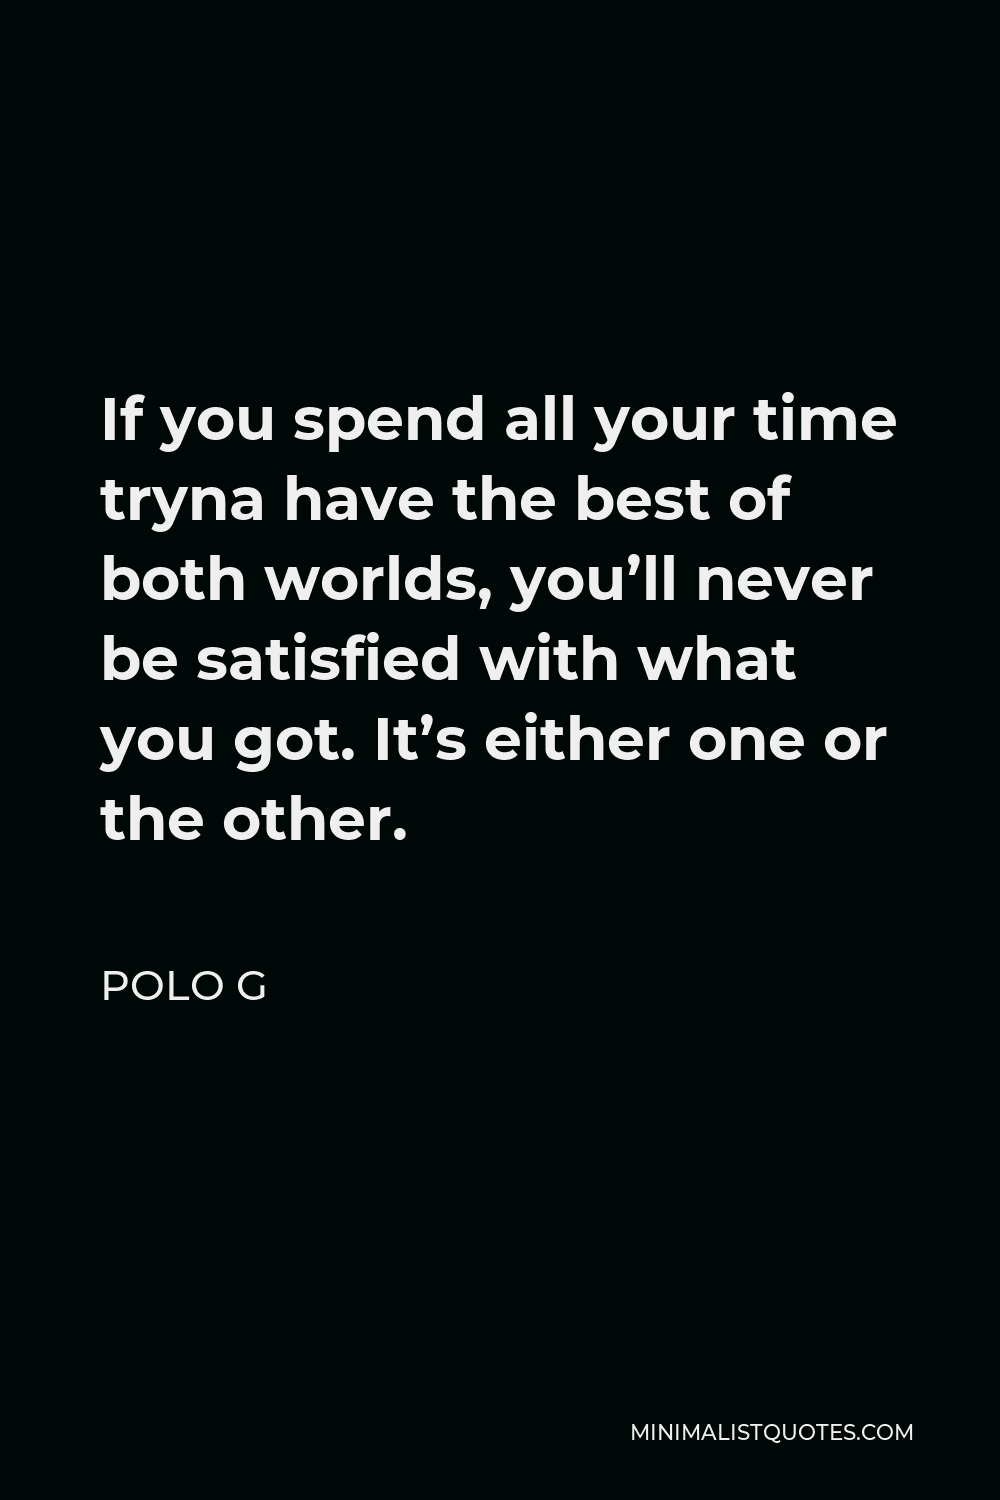 Polo G Quote: If You Spend All Your Time Tryna Have The Best Of Both Worlds, You'll Never Be Satisfied With What You Got. It's Either One Or The Other.